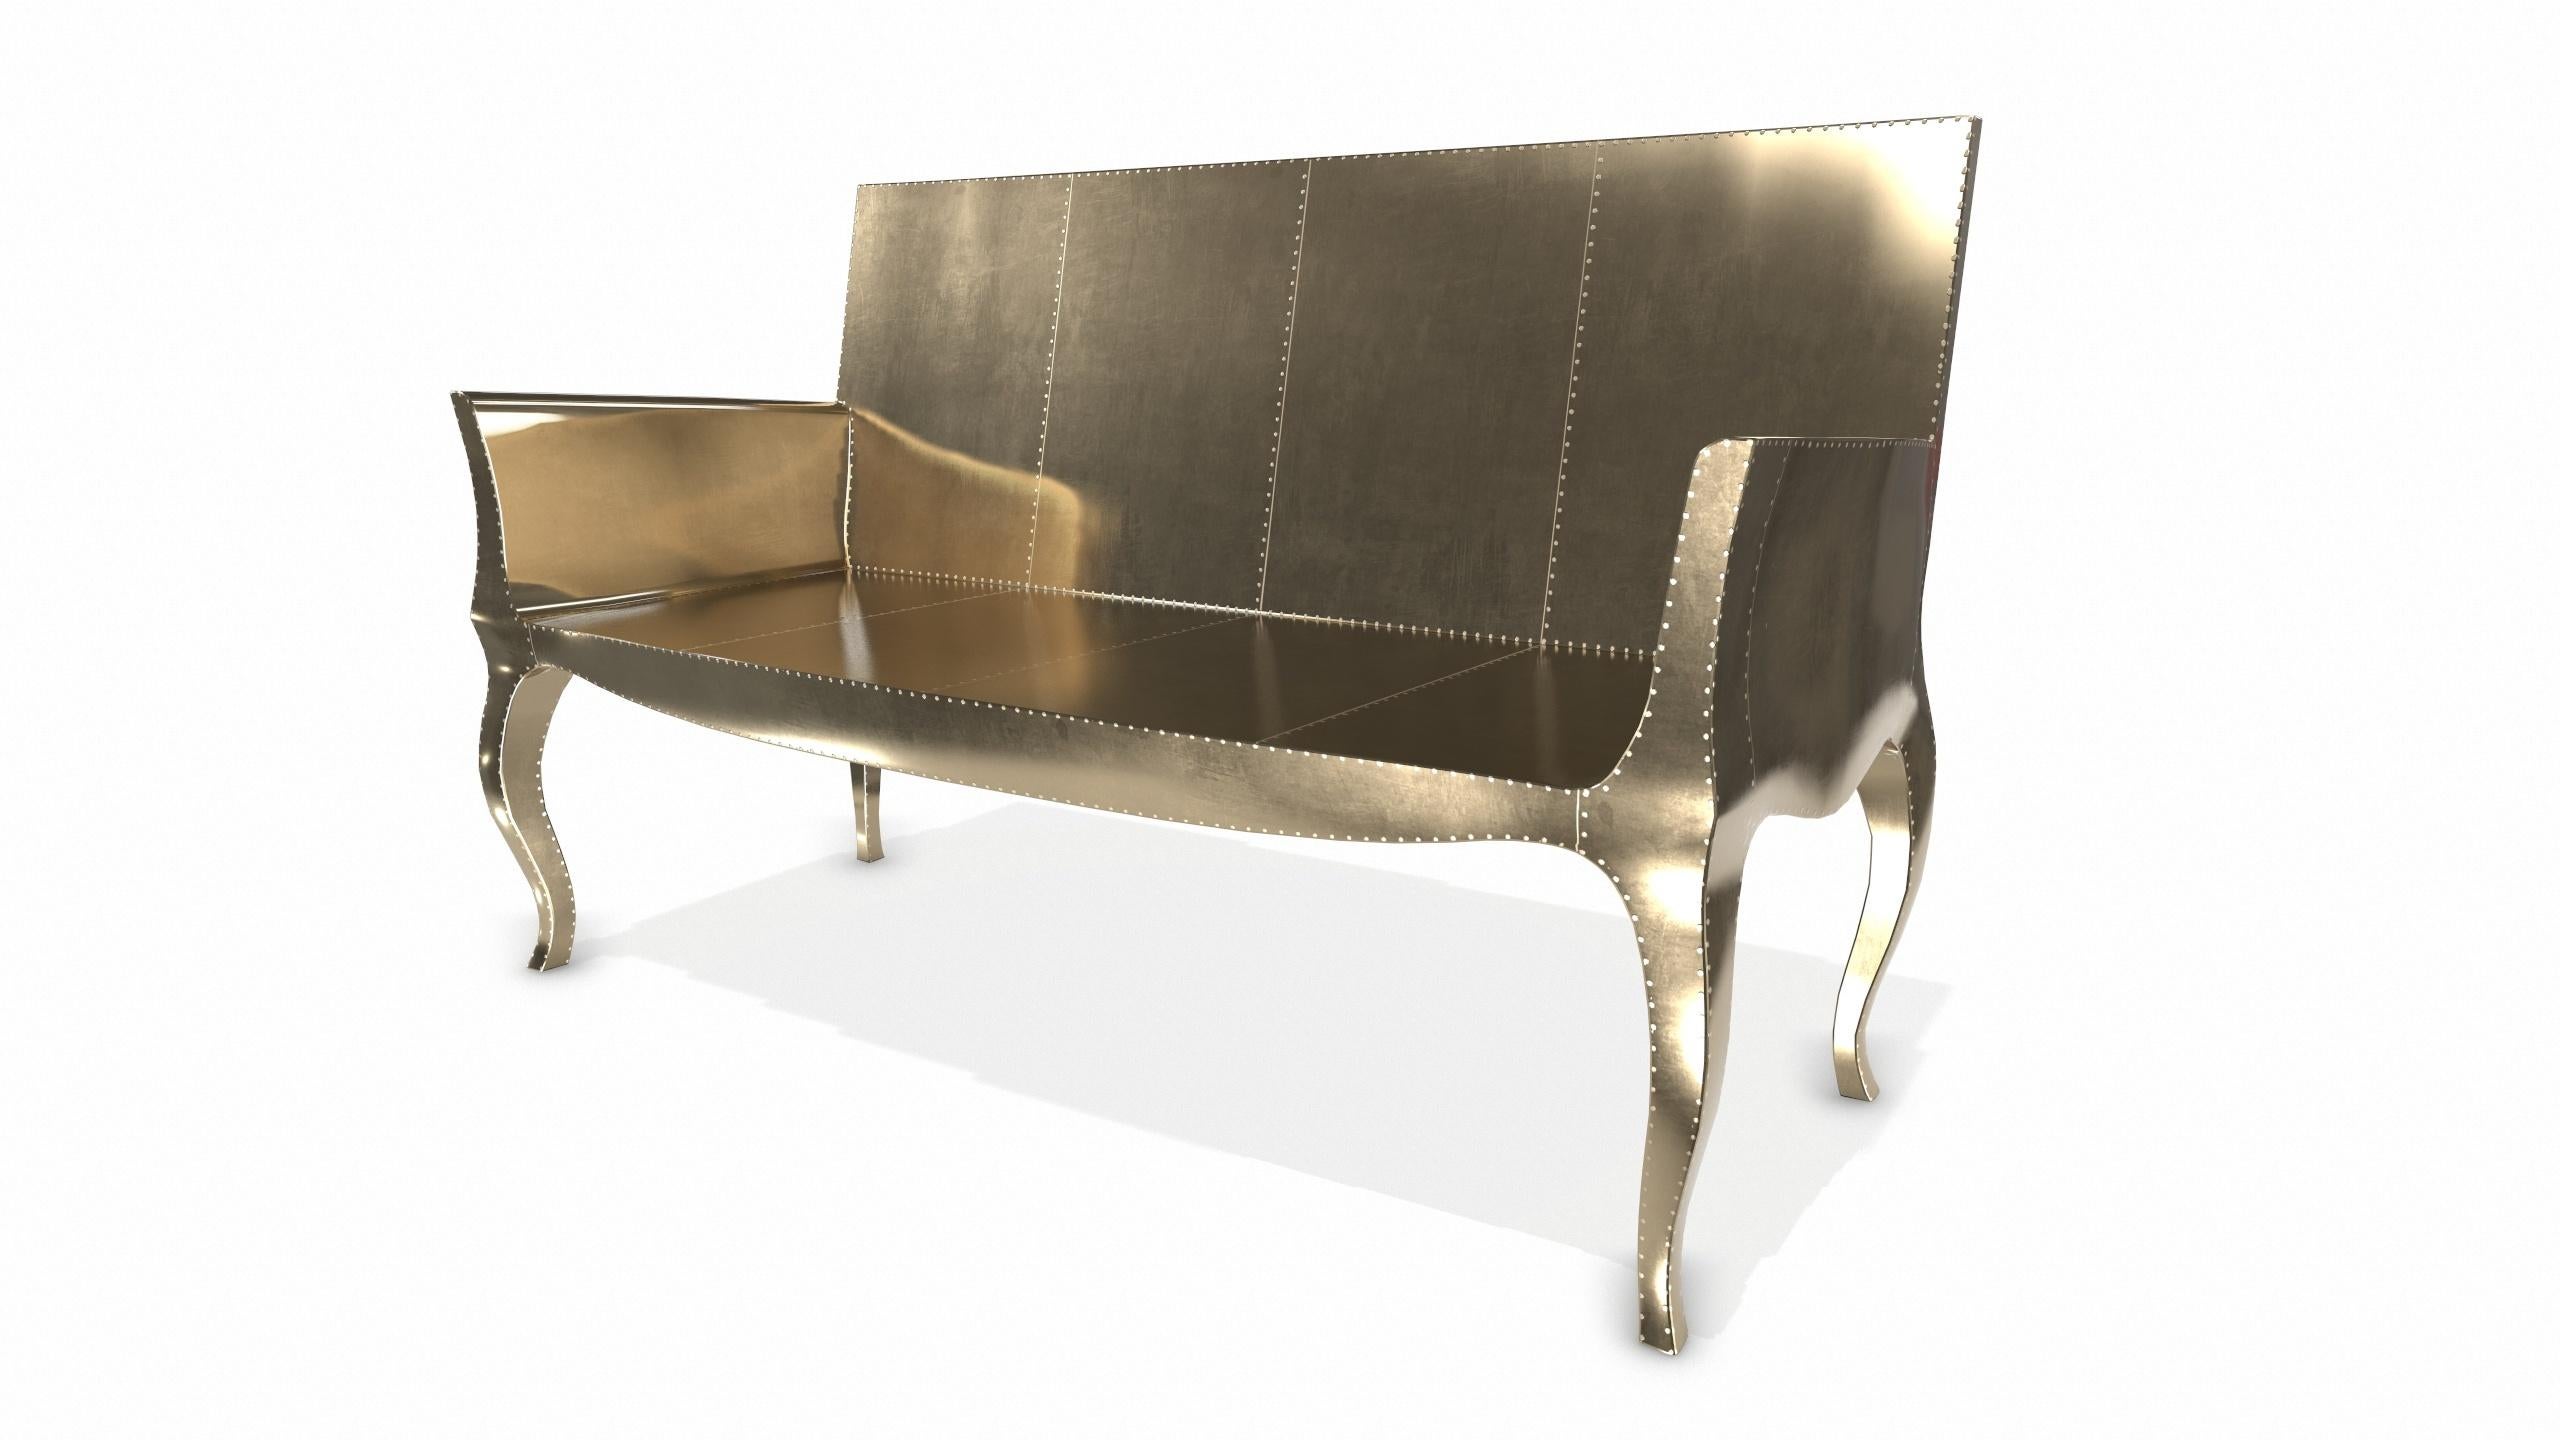 American Louise Settee Art Deco Canapes in Smooth Brass by Paul Mathieu for S Odegard For Sale